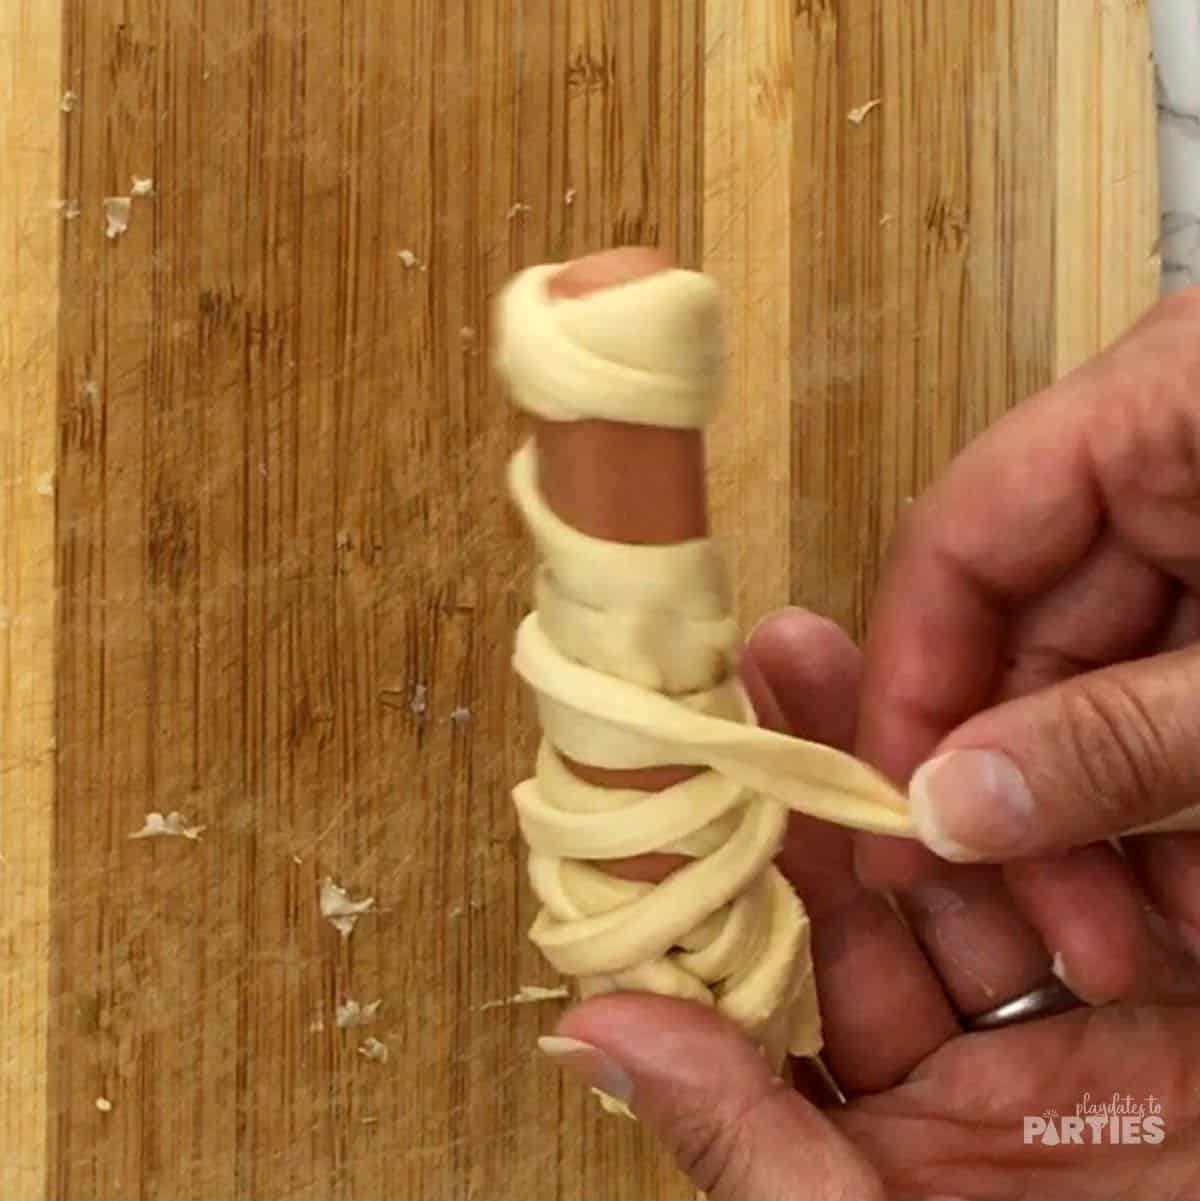 Wrapping a hot dog in dough to create a mummy.